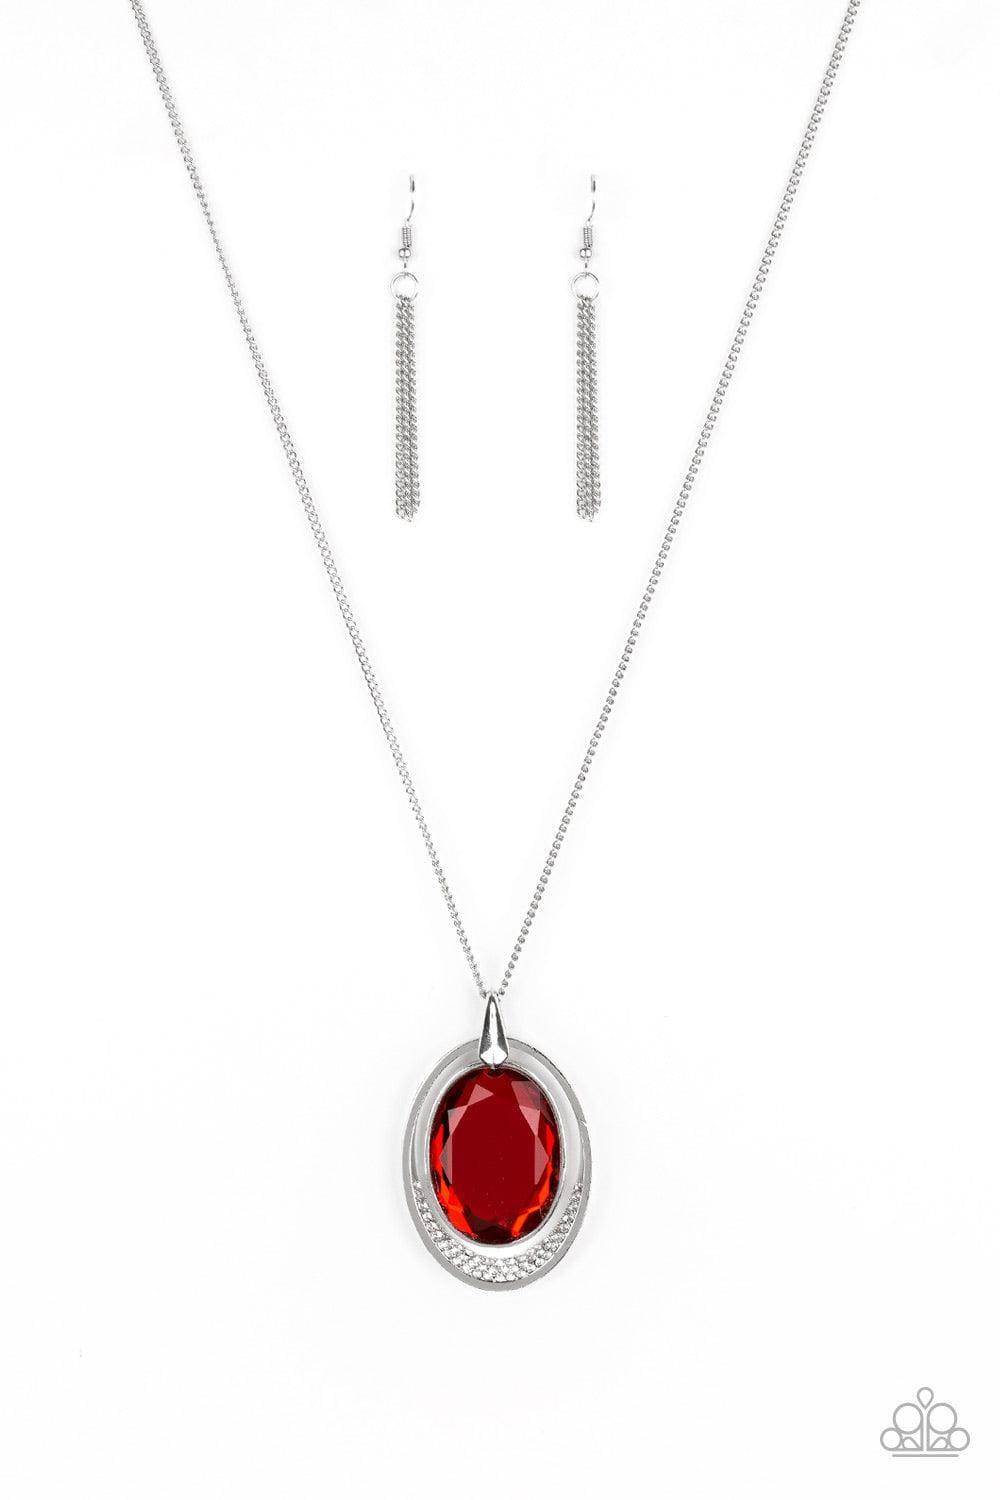 Paparazzi Accessories - Metro Must-have - Red Necklace - Bling by JessieK